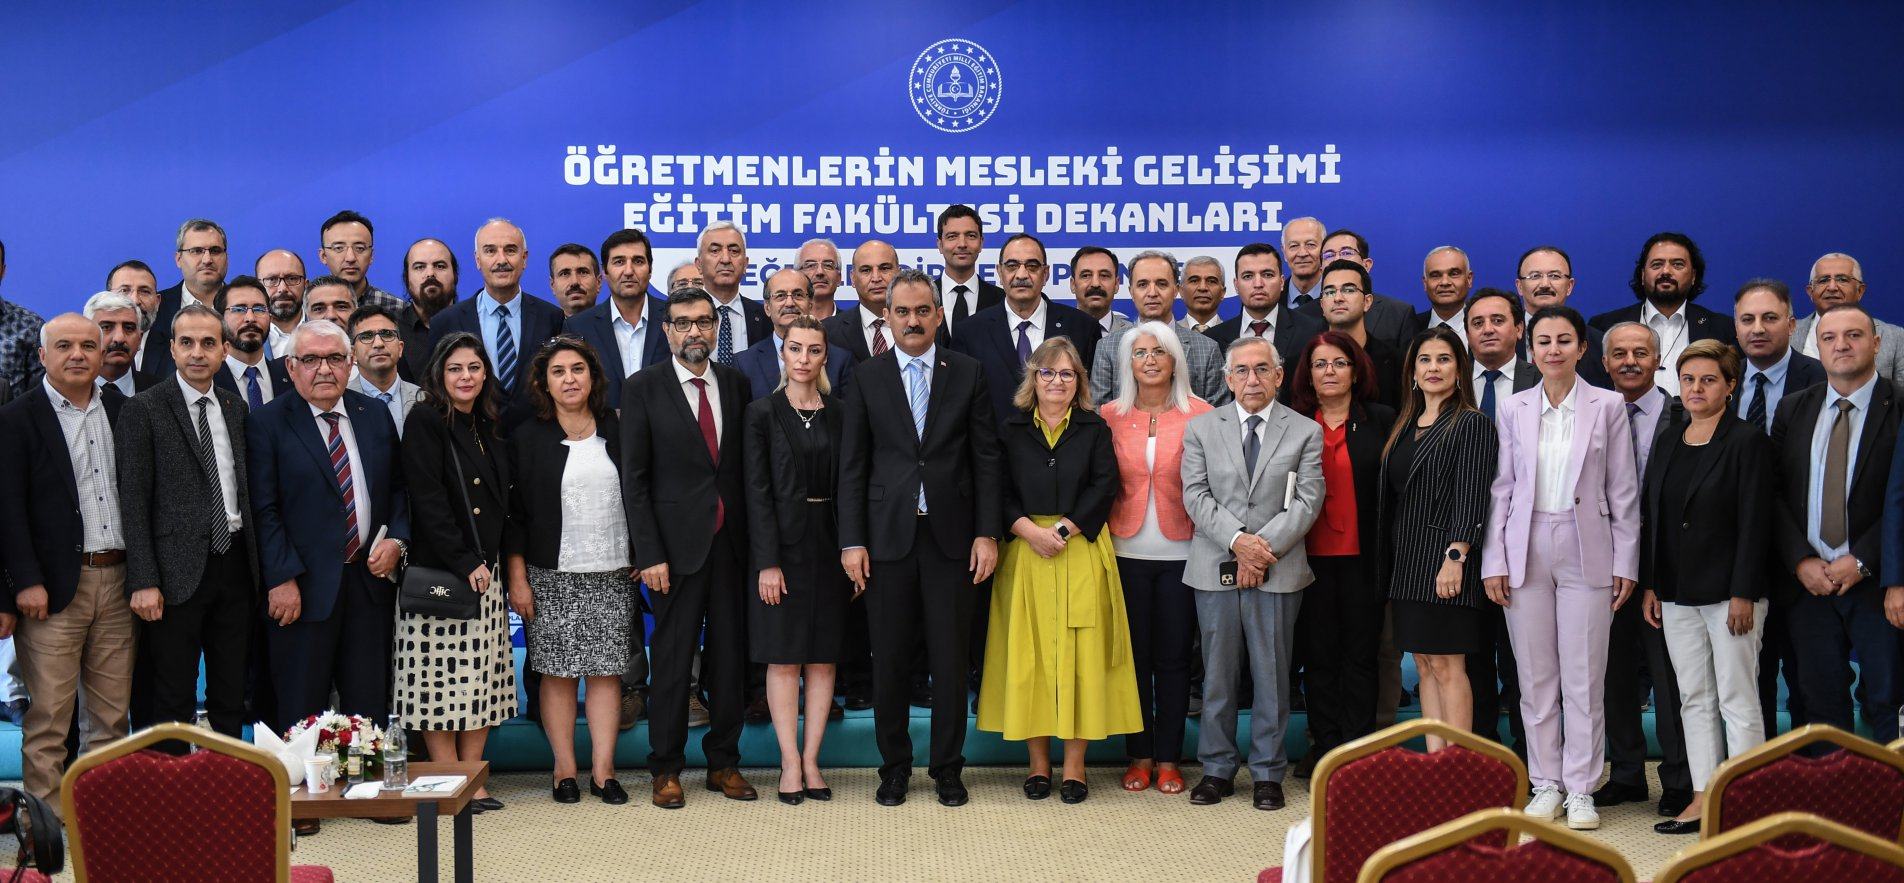 MINISTER ÖZER GOT TOGETHER WITH THE DEANS OF EDUCATION FACULTIES